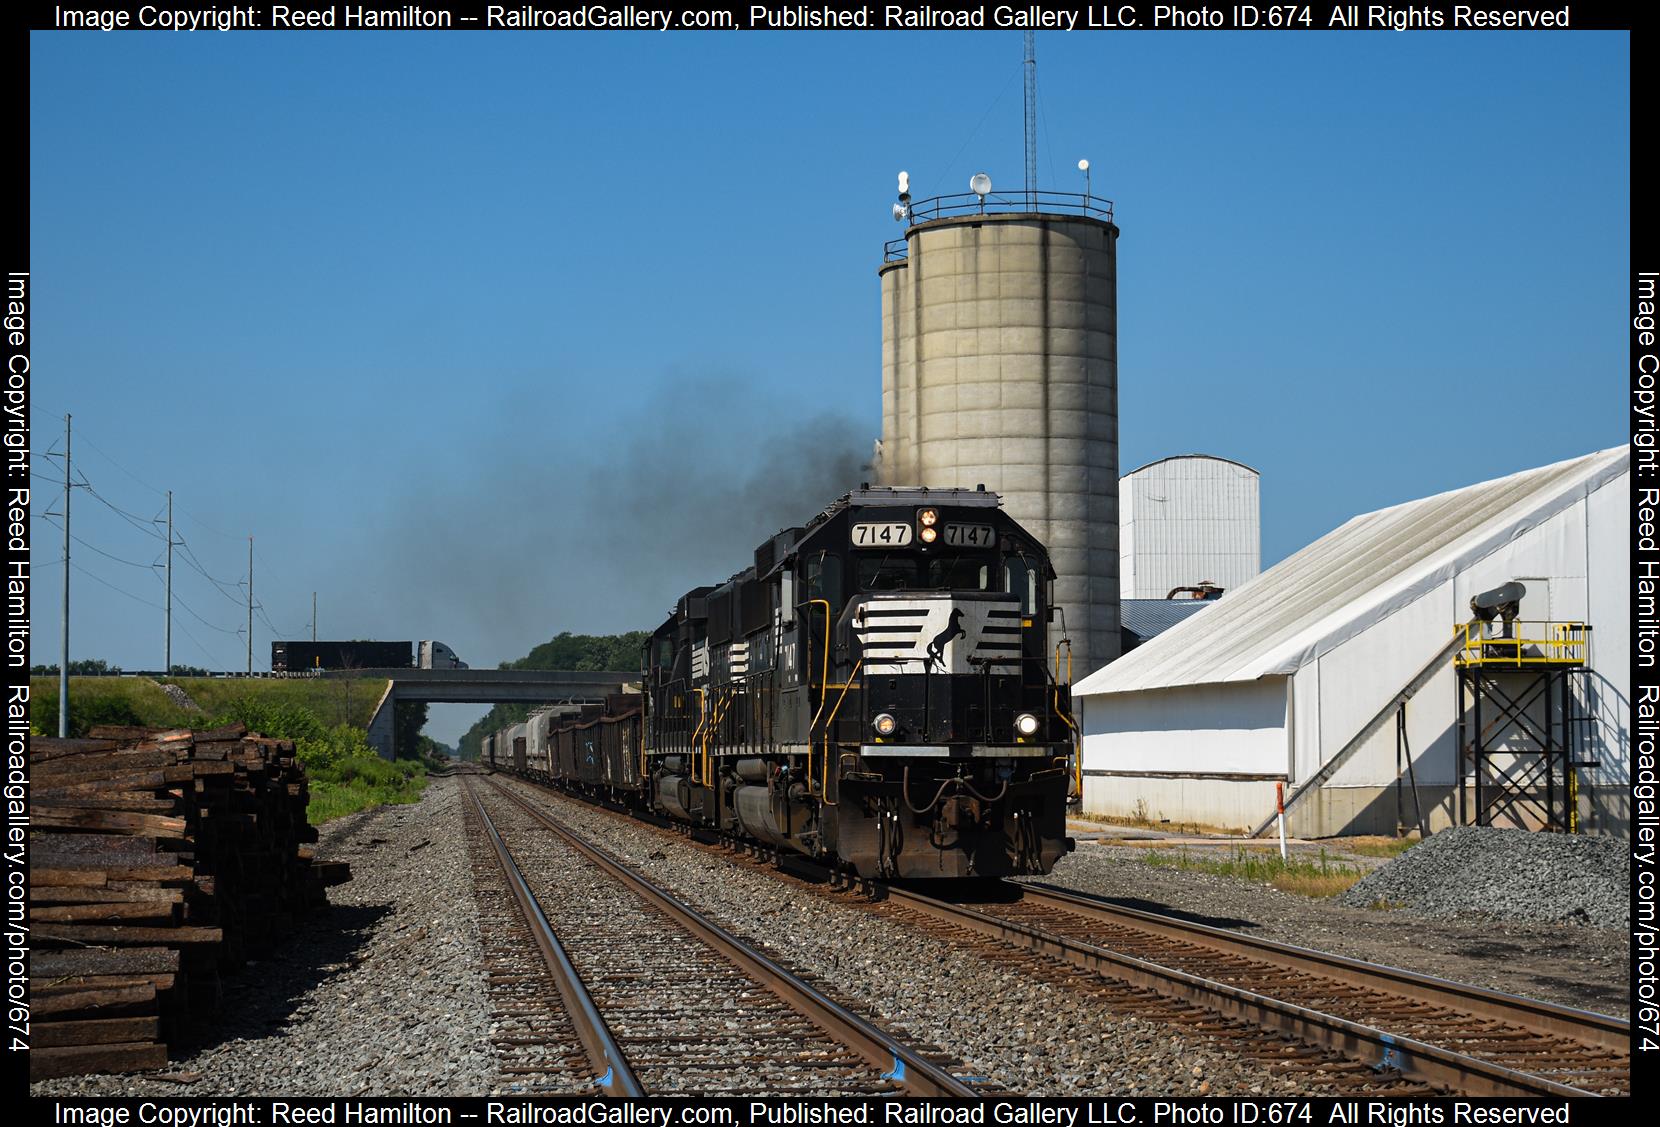 NS 7147 is a class EMD GP60 and  is pictured in Rolling Prairie, IN, United States.  This was taken along the Dearborn Division/Chicago Line on the Norfolk Southern. Photo Copyright: Reed Hamilton uploaded to Railroad Gallery on 02/07/2023. This photograph of NS 7147 was taken on Monday, July 18, 2022. All Rights Reserved. 